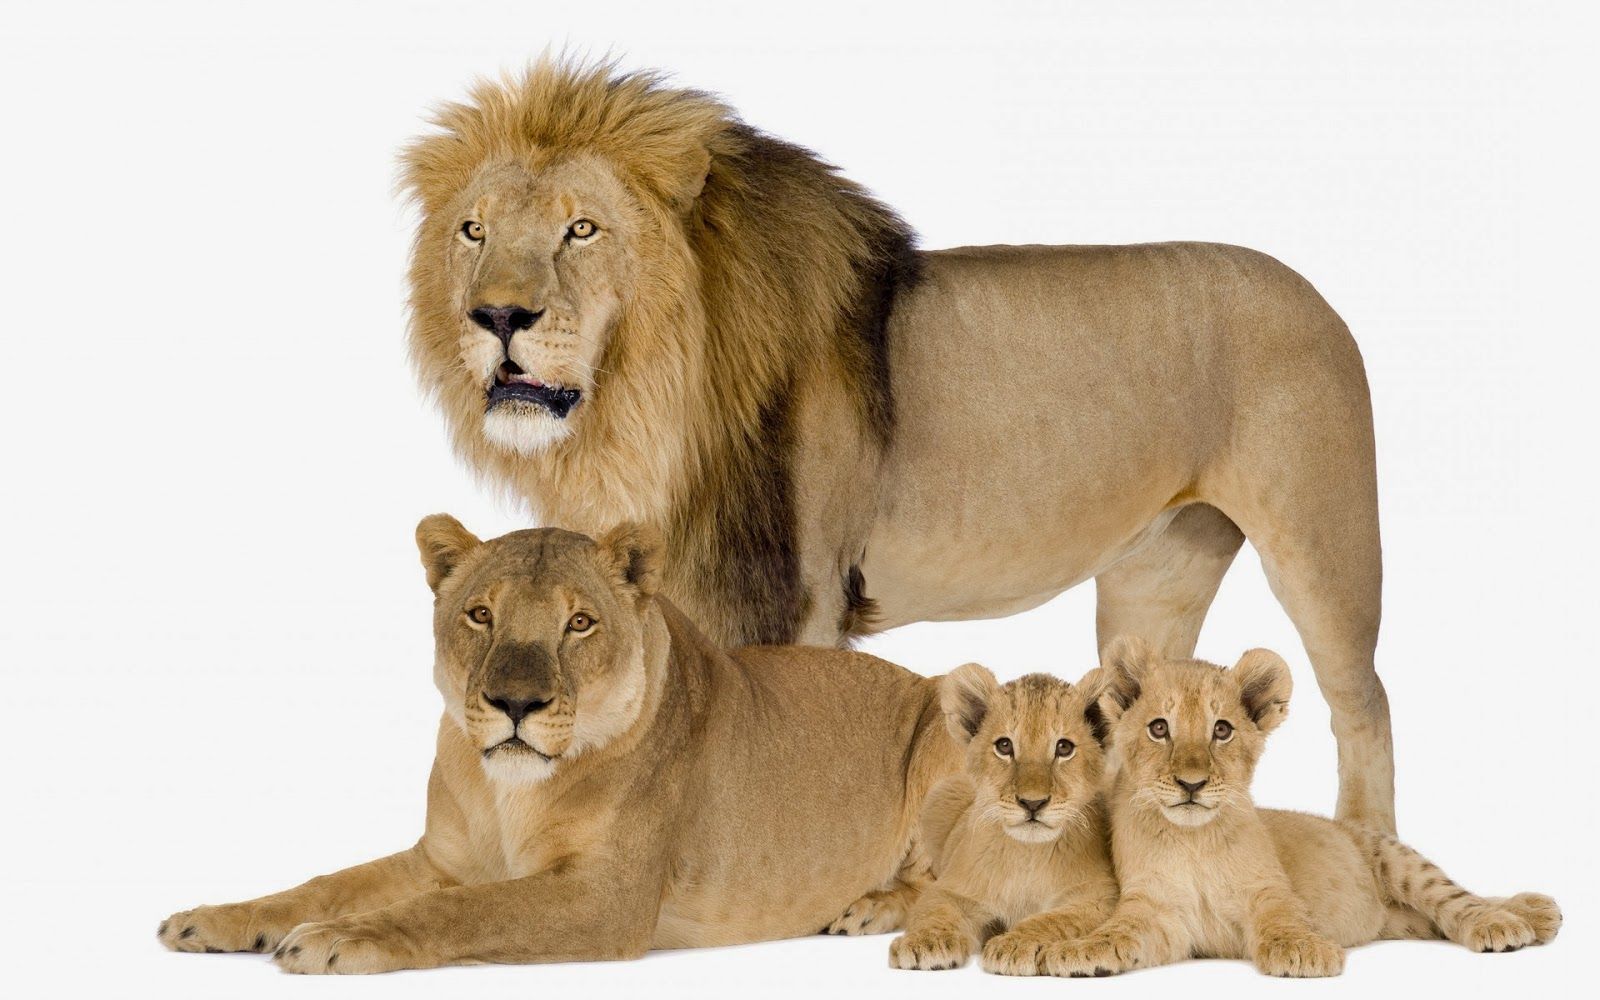 family of animals. Photo of a lion family with father, mother and their young. HD lions. Lion family, Panthera leo, Lion facts